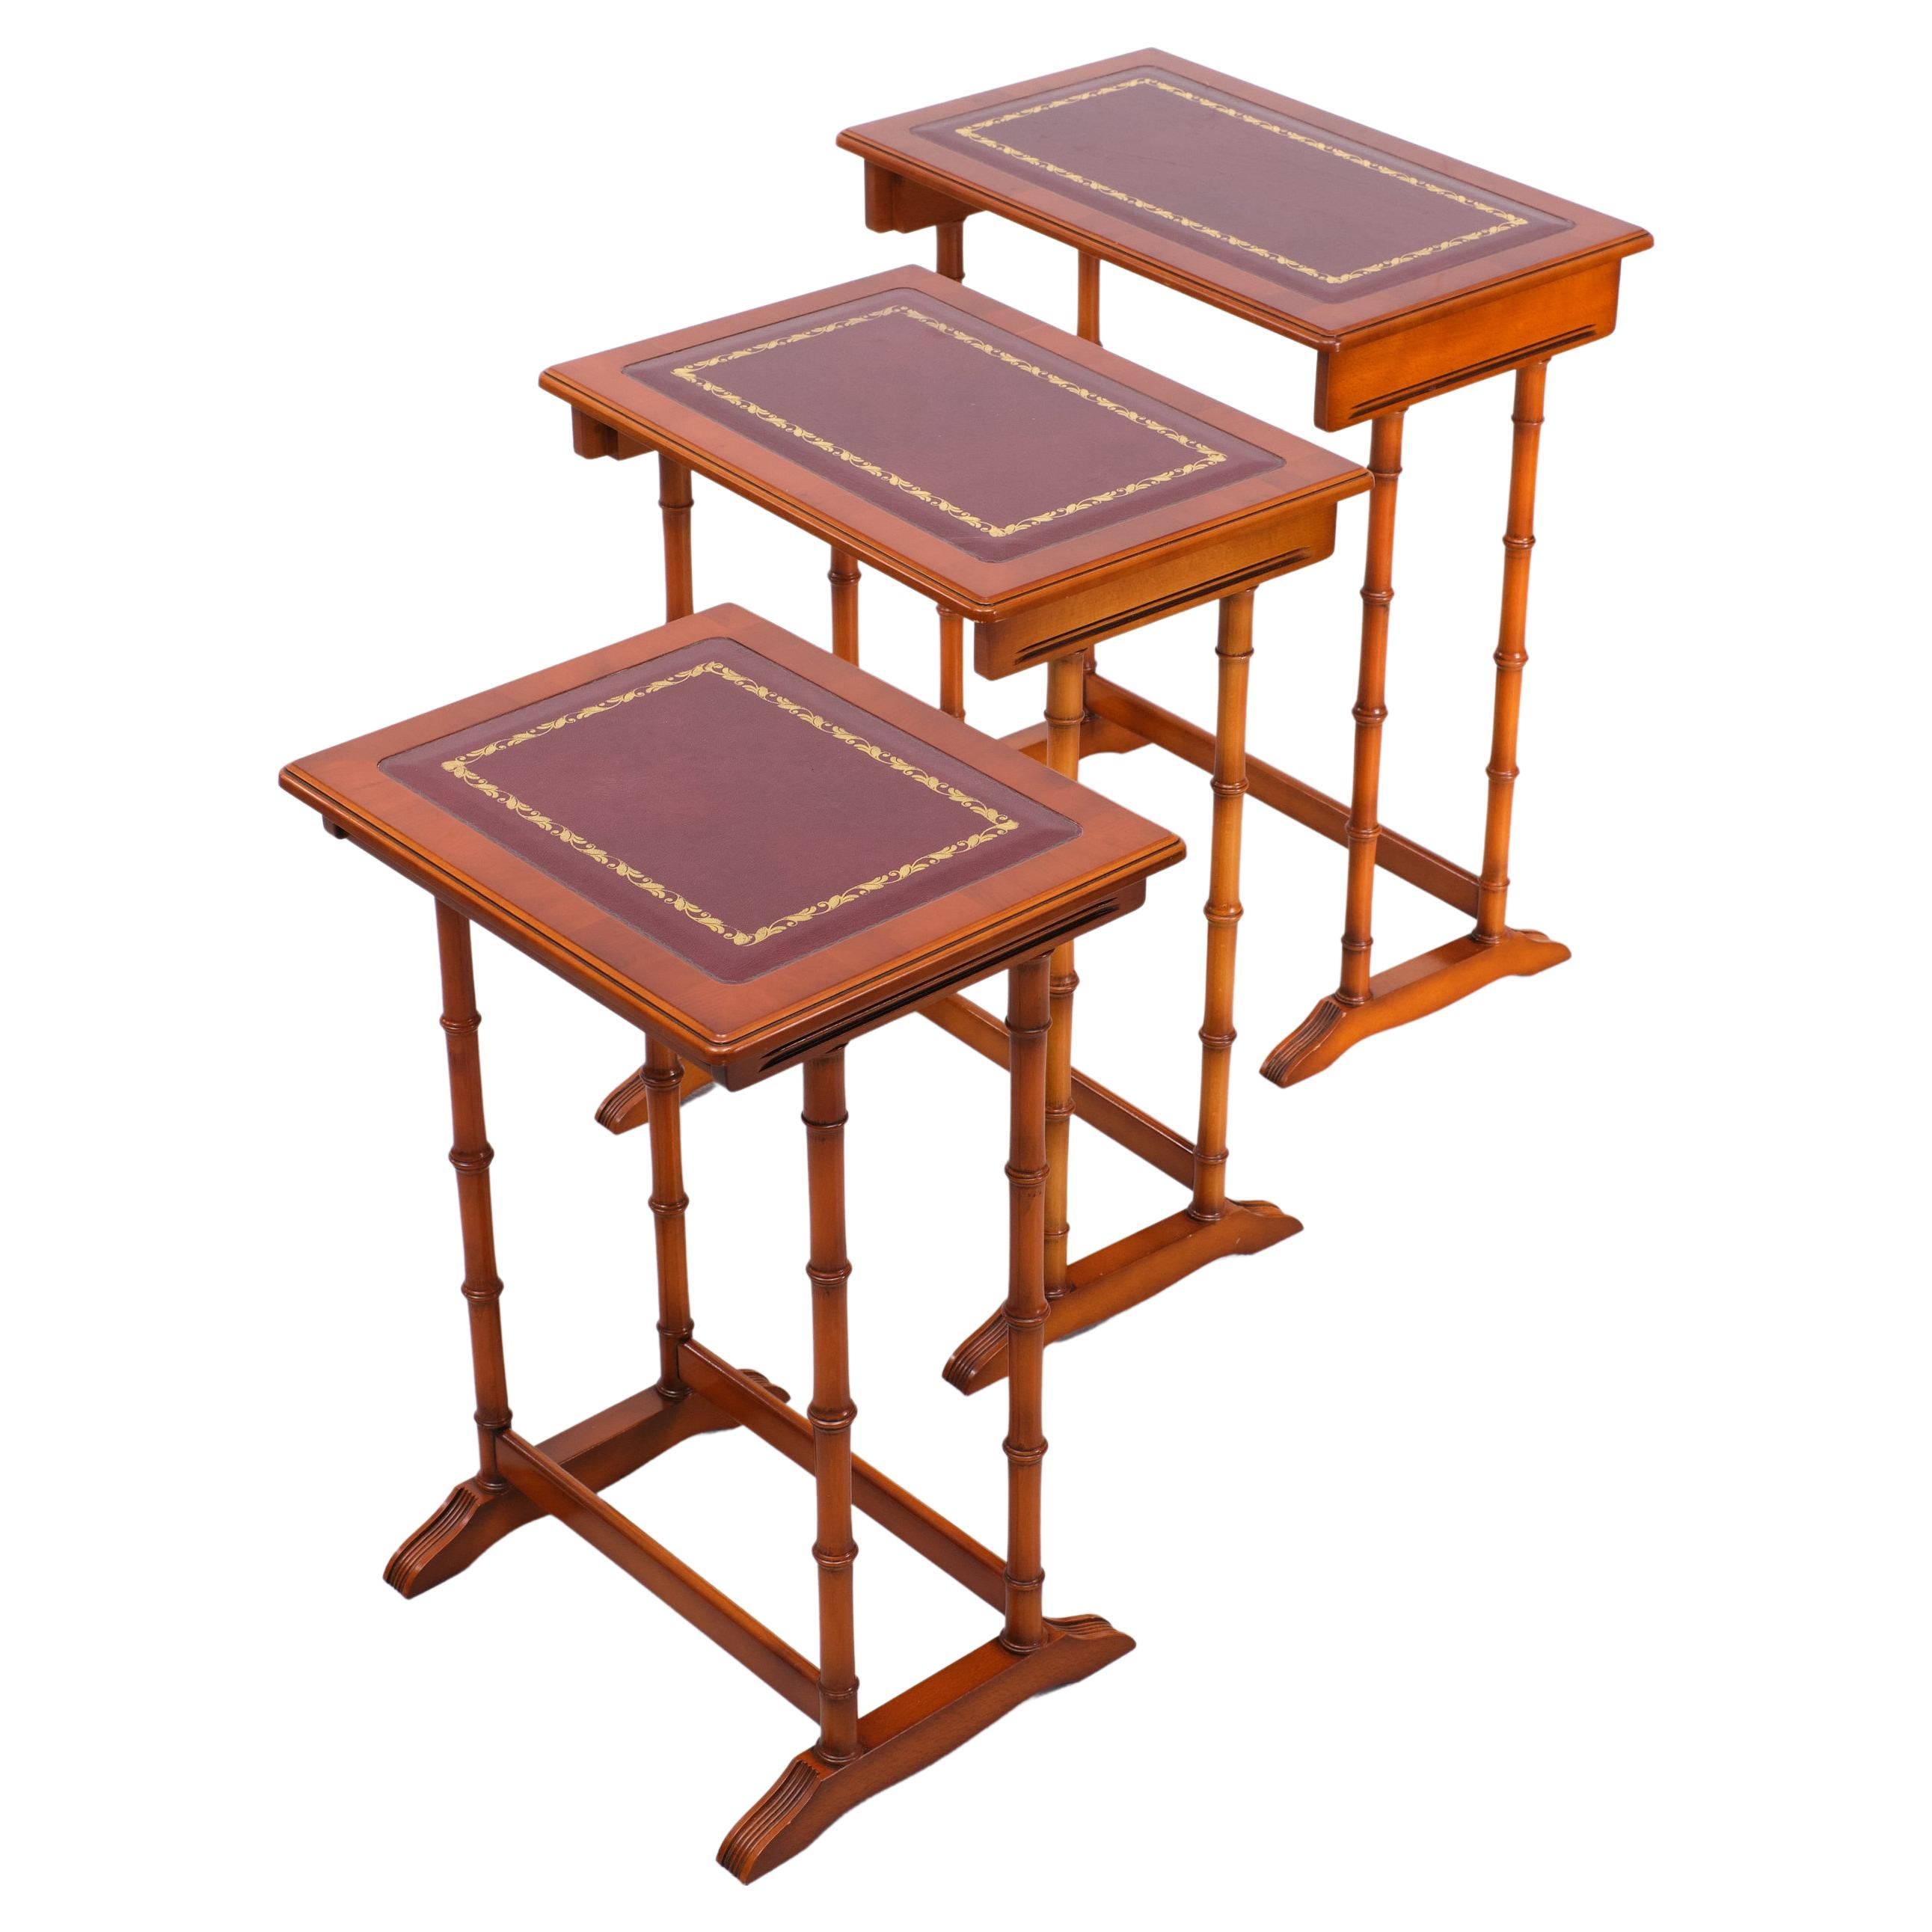   Exclusive English furniture  Cherry wood nesting tables  1970s  For Sale 1